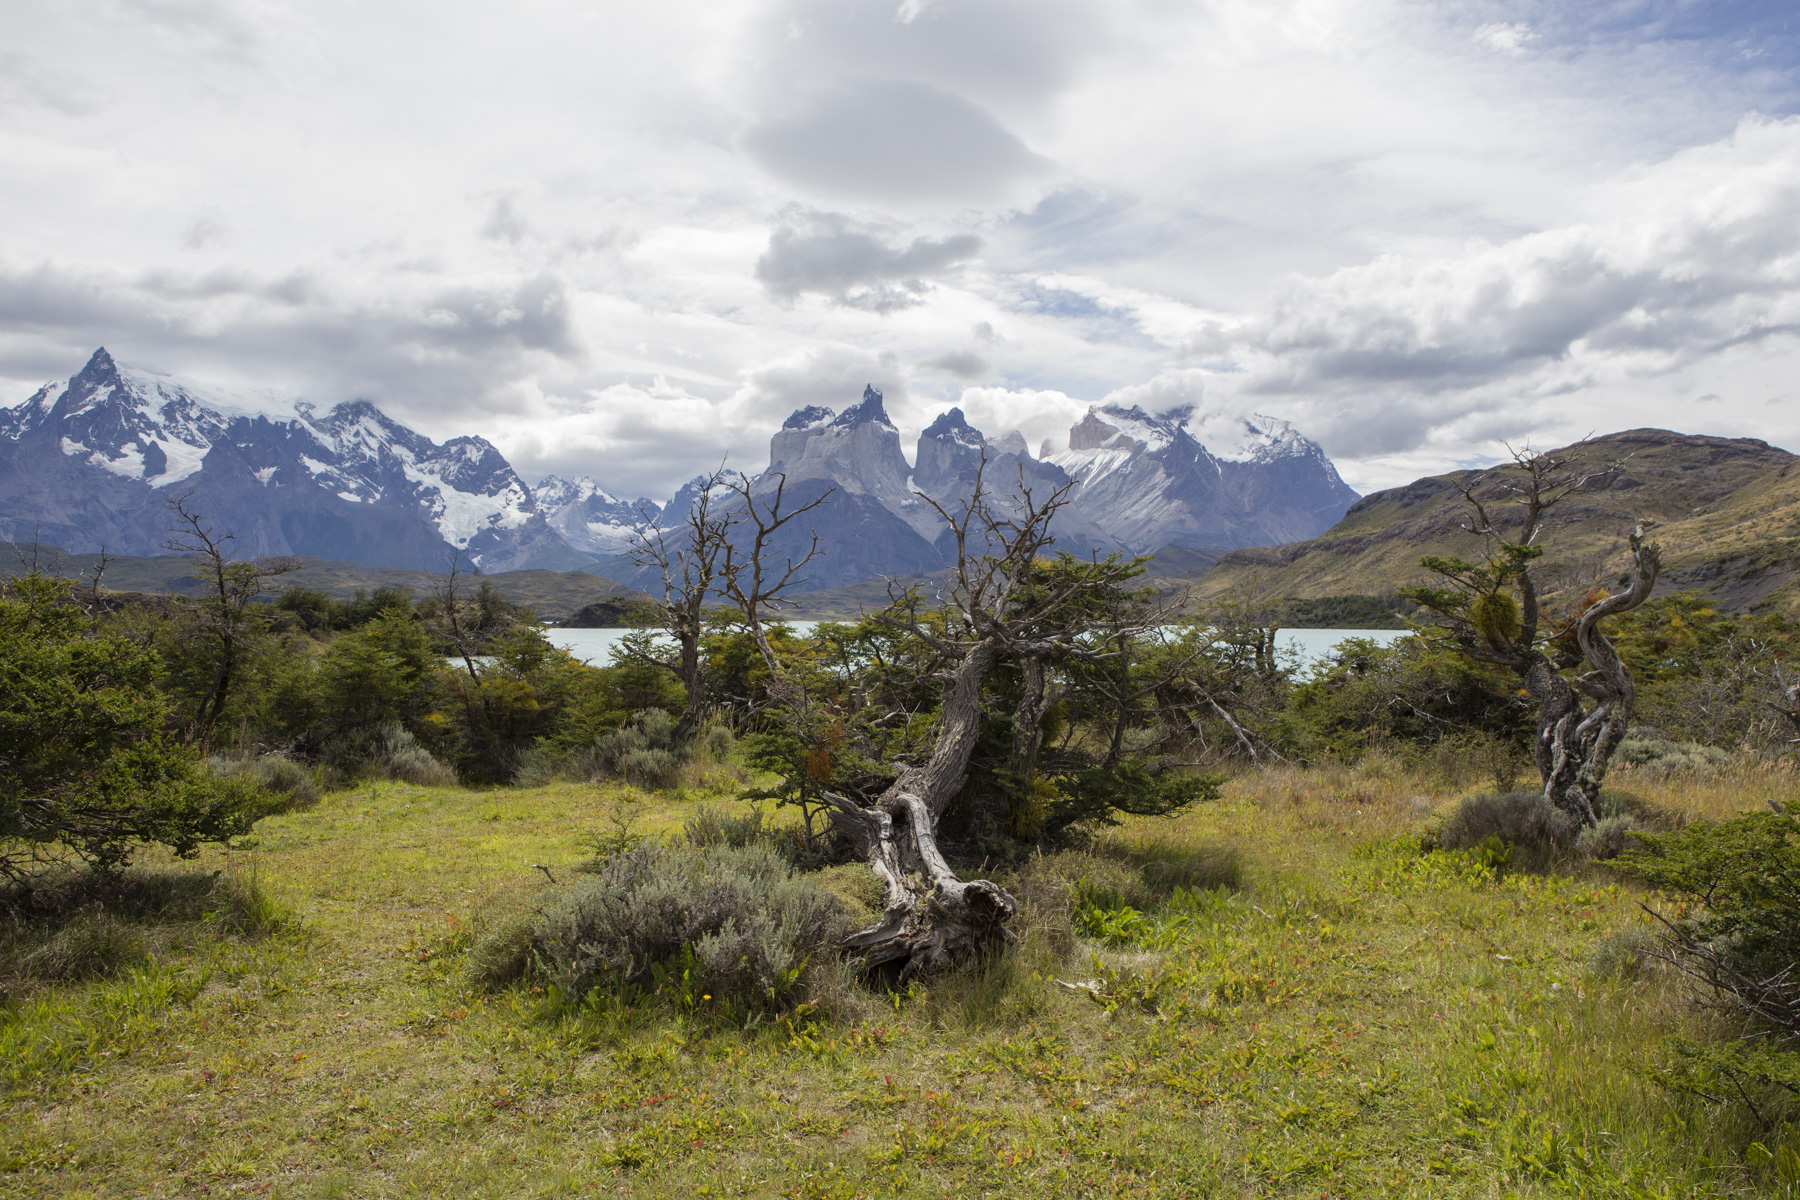 Total view of Torres del Paine mountain range from Pehoe campground